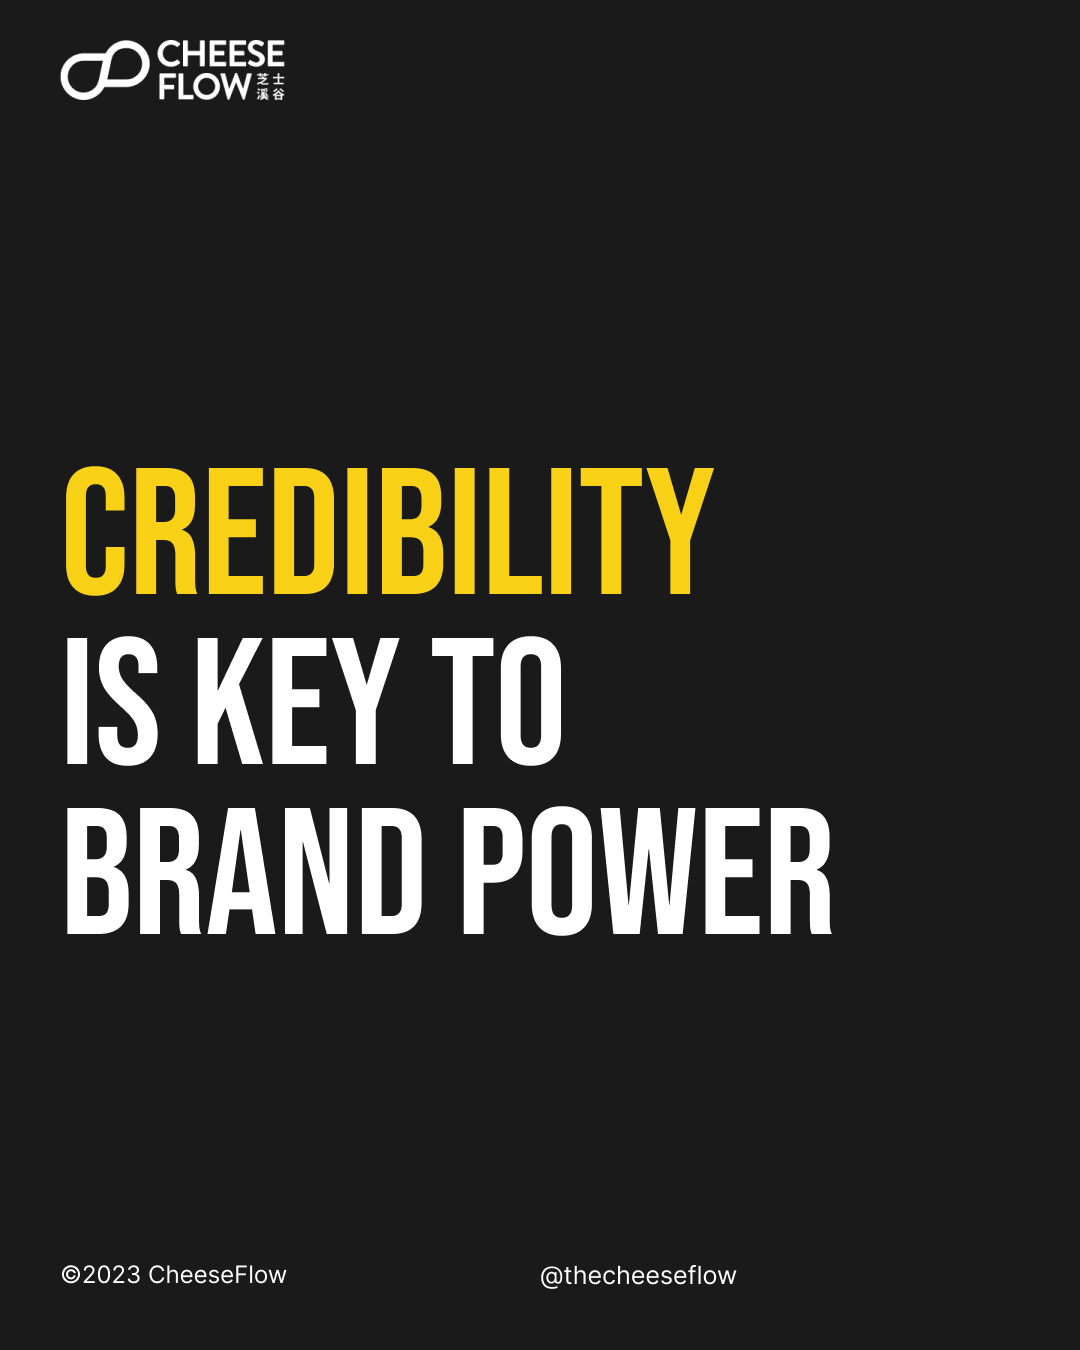 Credibility is key to brand power